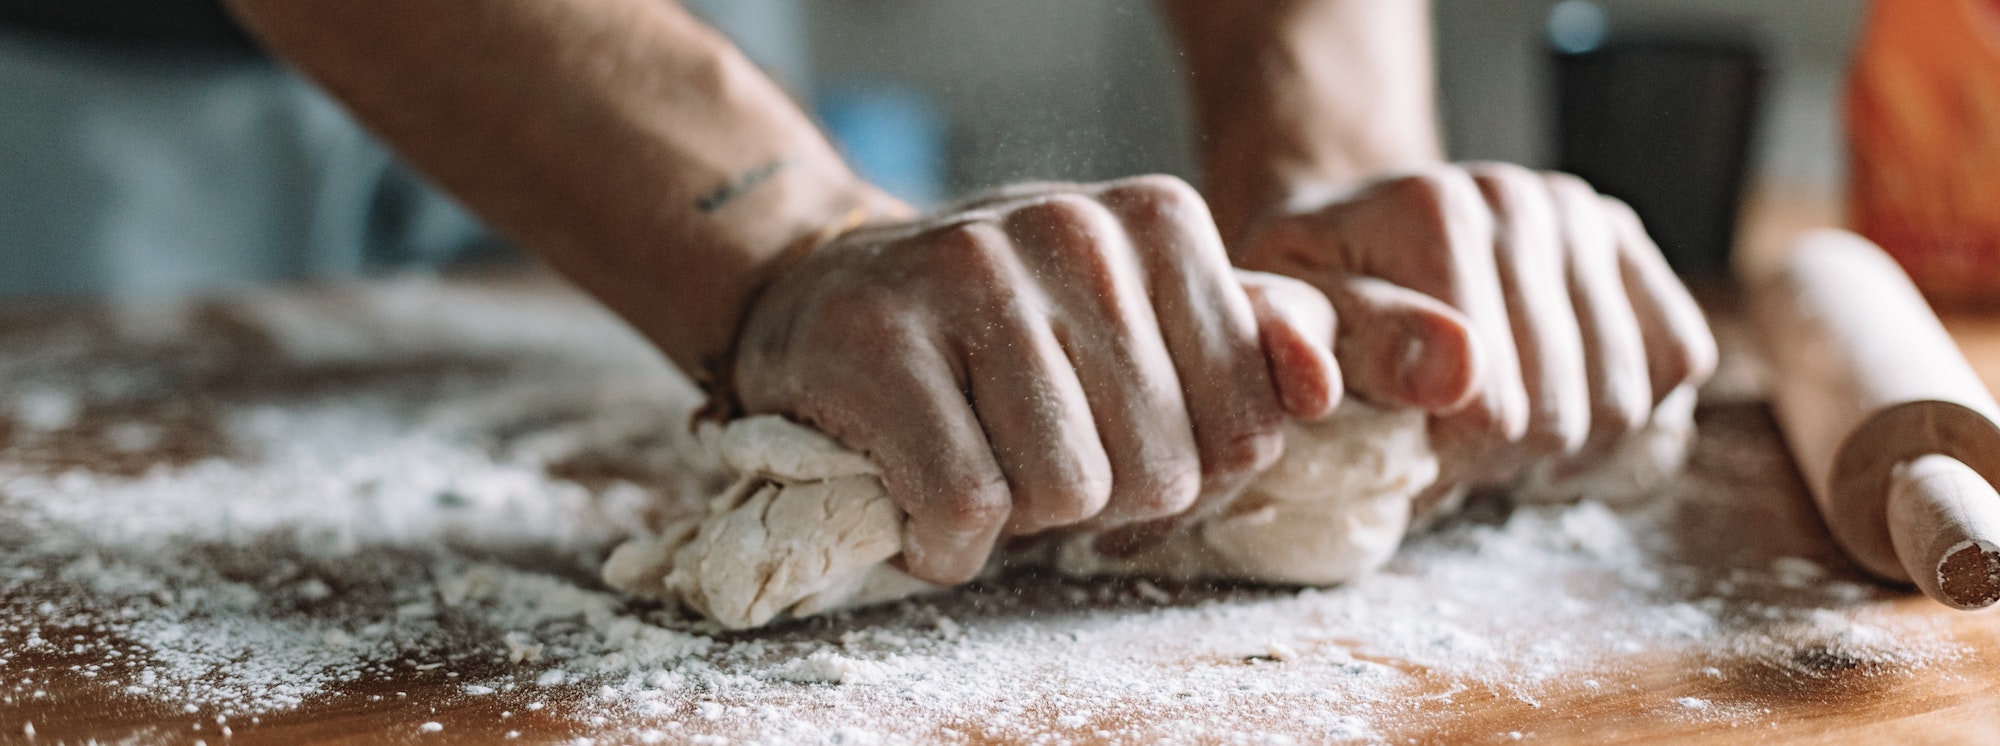 new_theme_hands-kneading